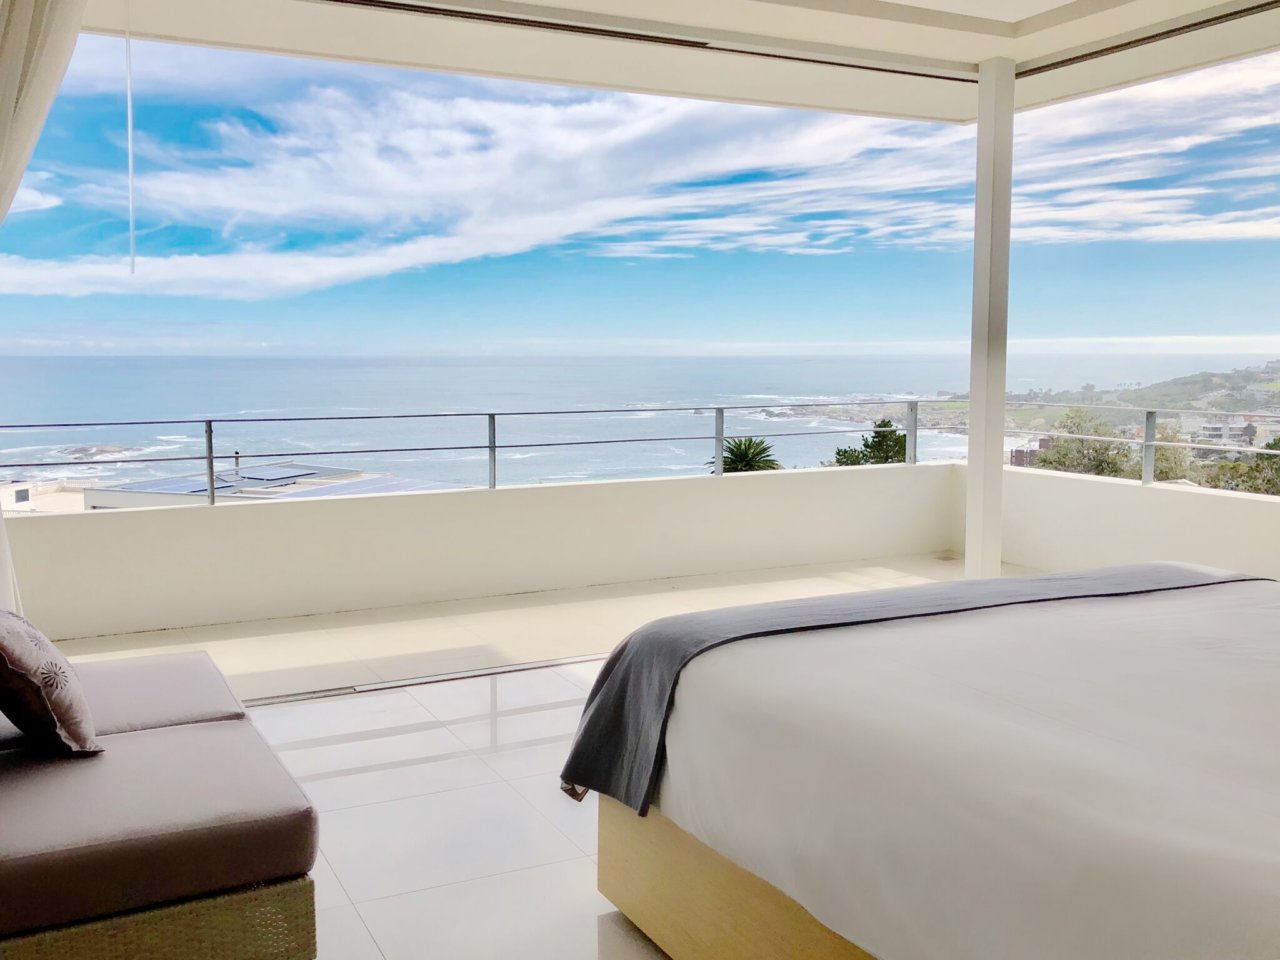 Photo 21 of Aqua House accommodation in Camps Bay, Cape Town with 3 bedrooms and 3 bathrooms